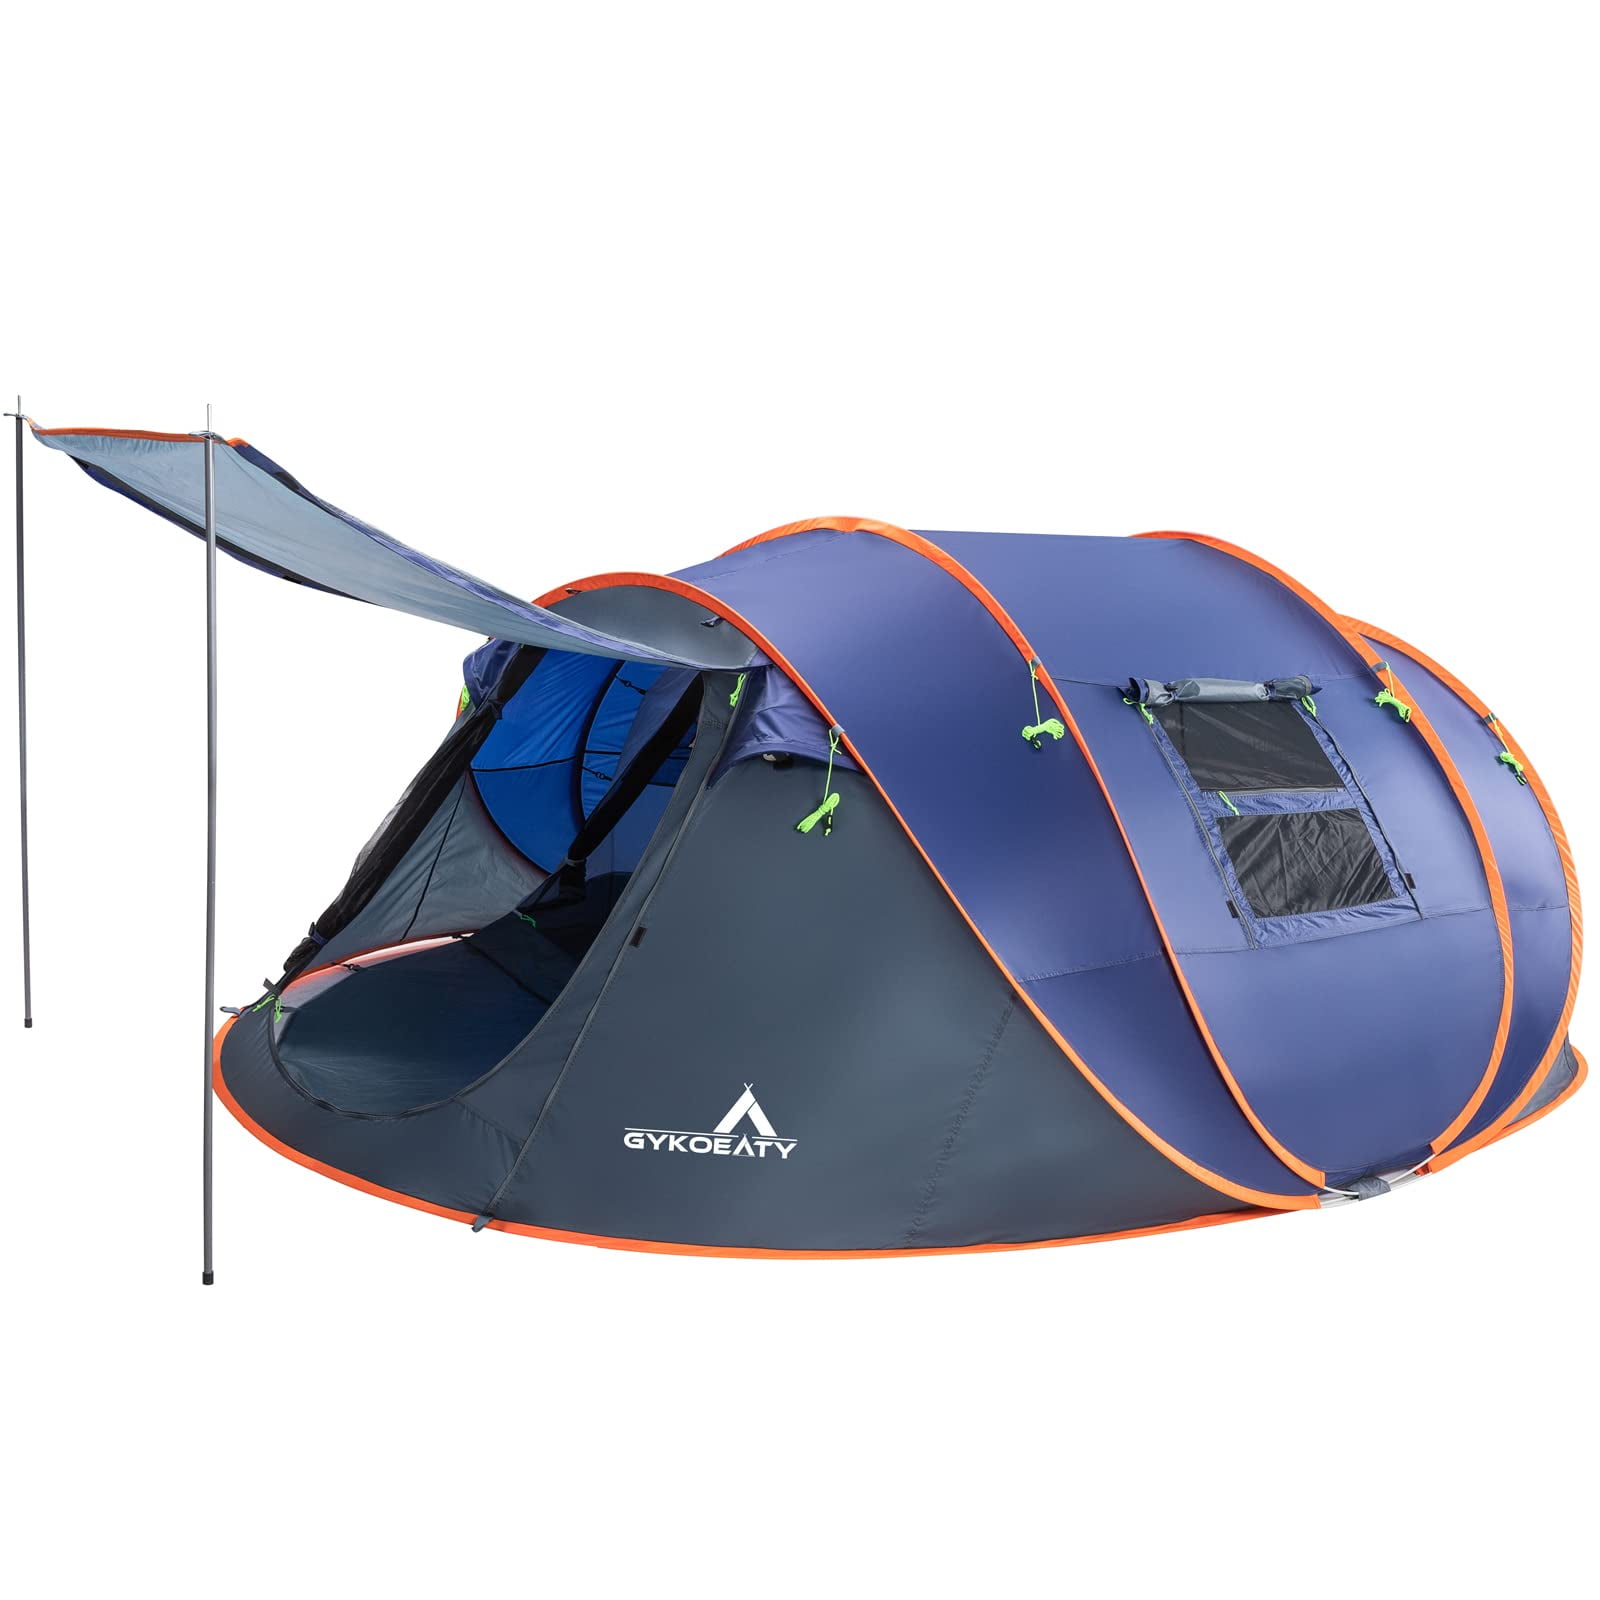 6 Person Easy Pop Up Tent,12.5'X8.5'X53.5'',Automatic Setup